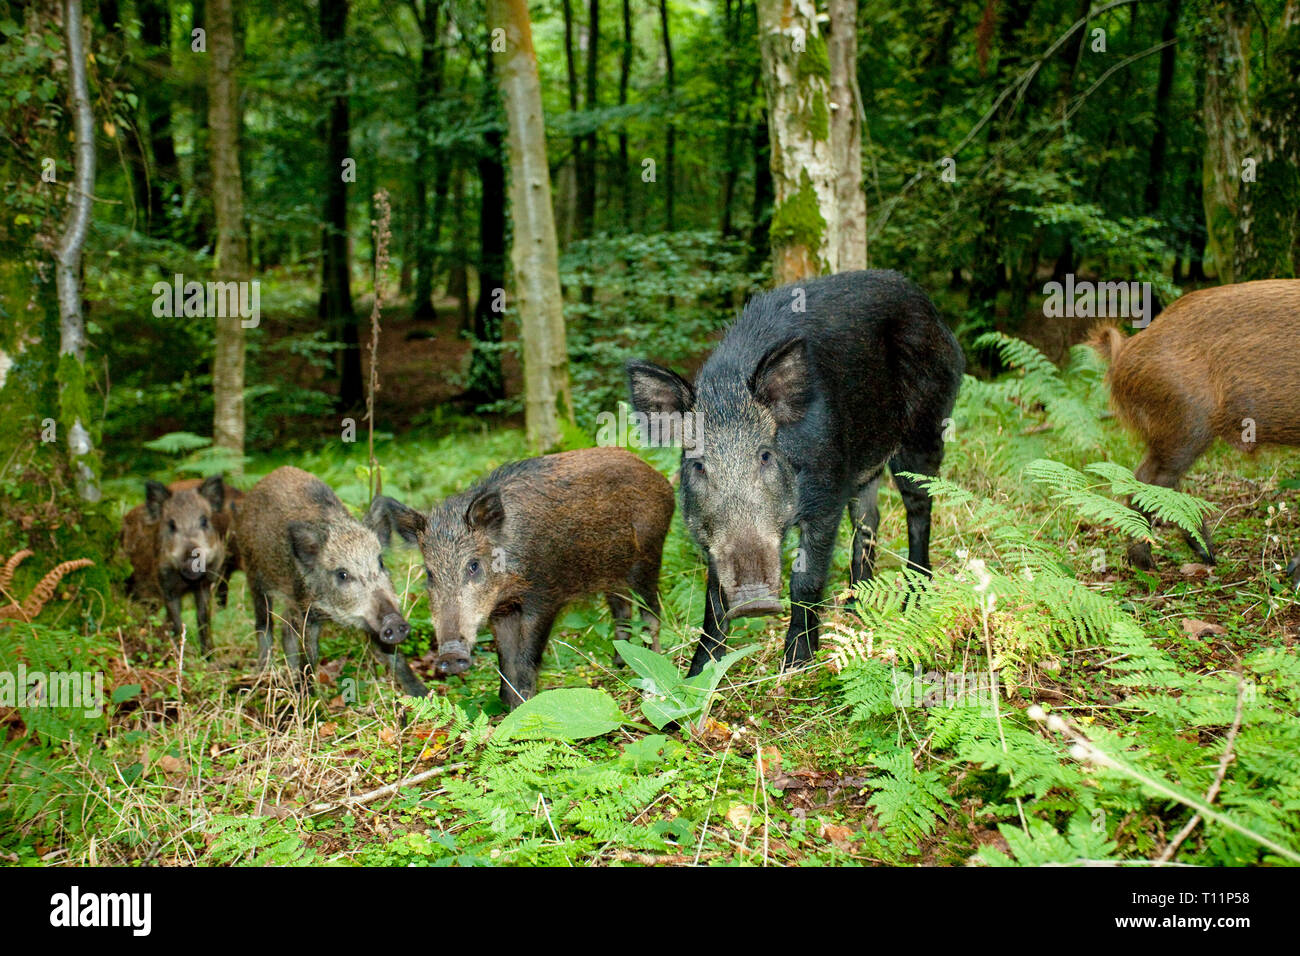 England, Gloucestershire, Forest of Dean. Native European Wild Boar (Sus scrofa) family in deciduous woodland. Stock Photo